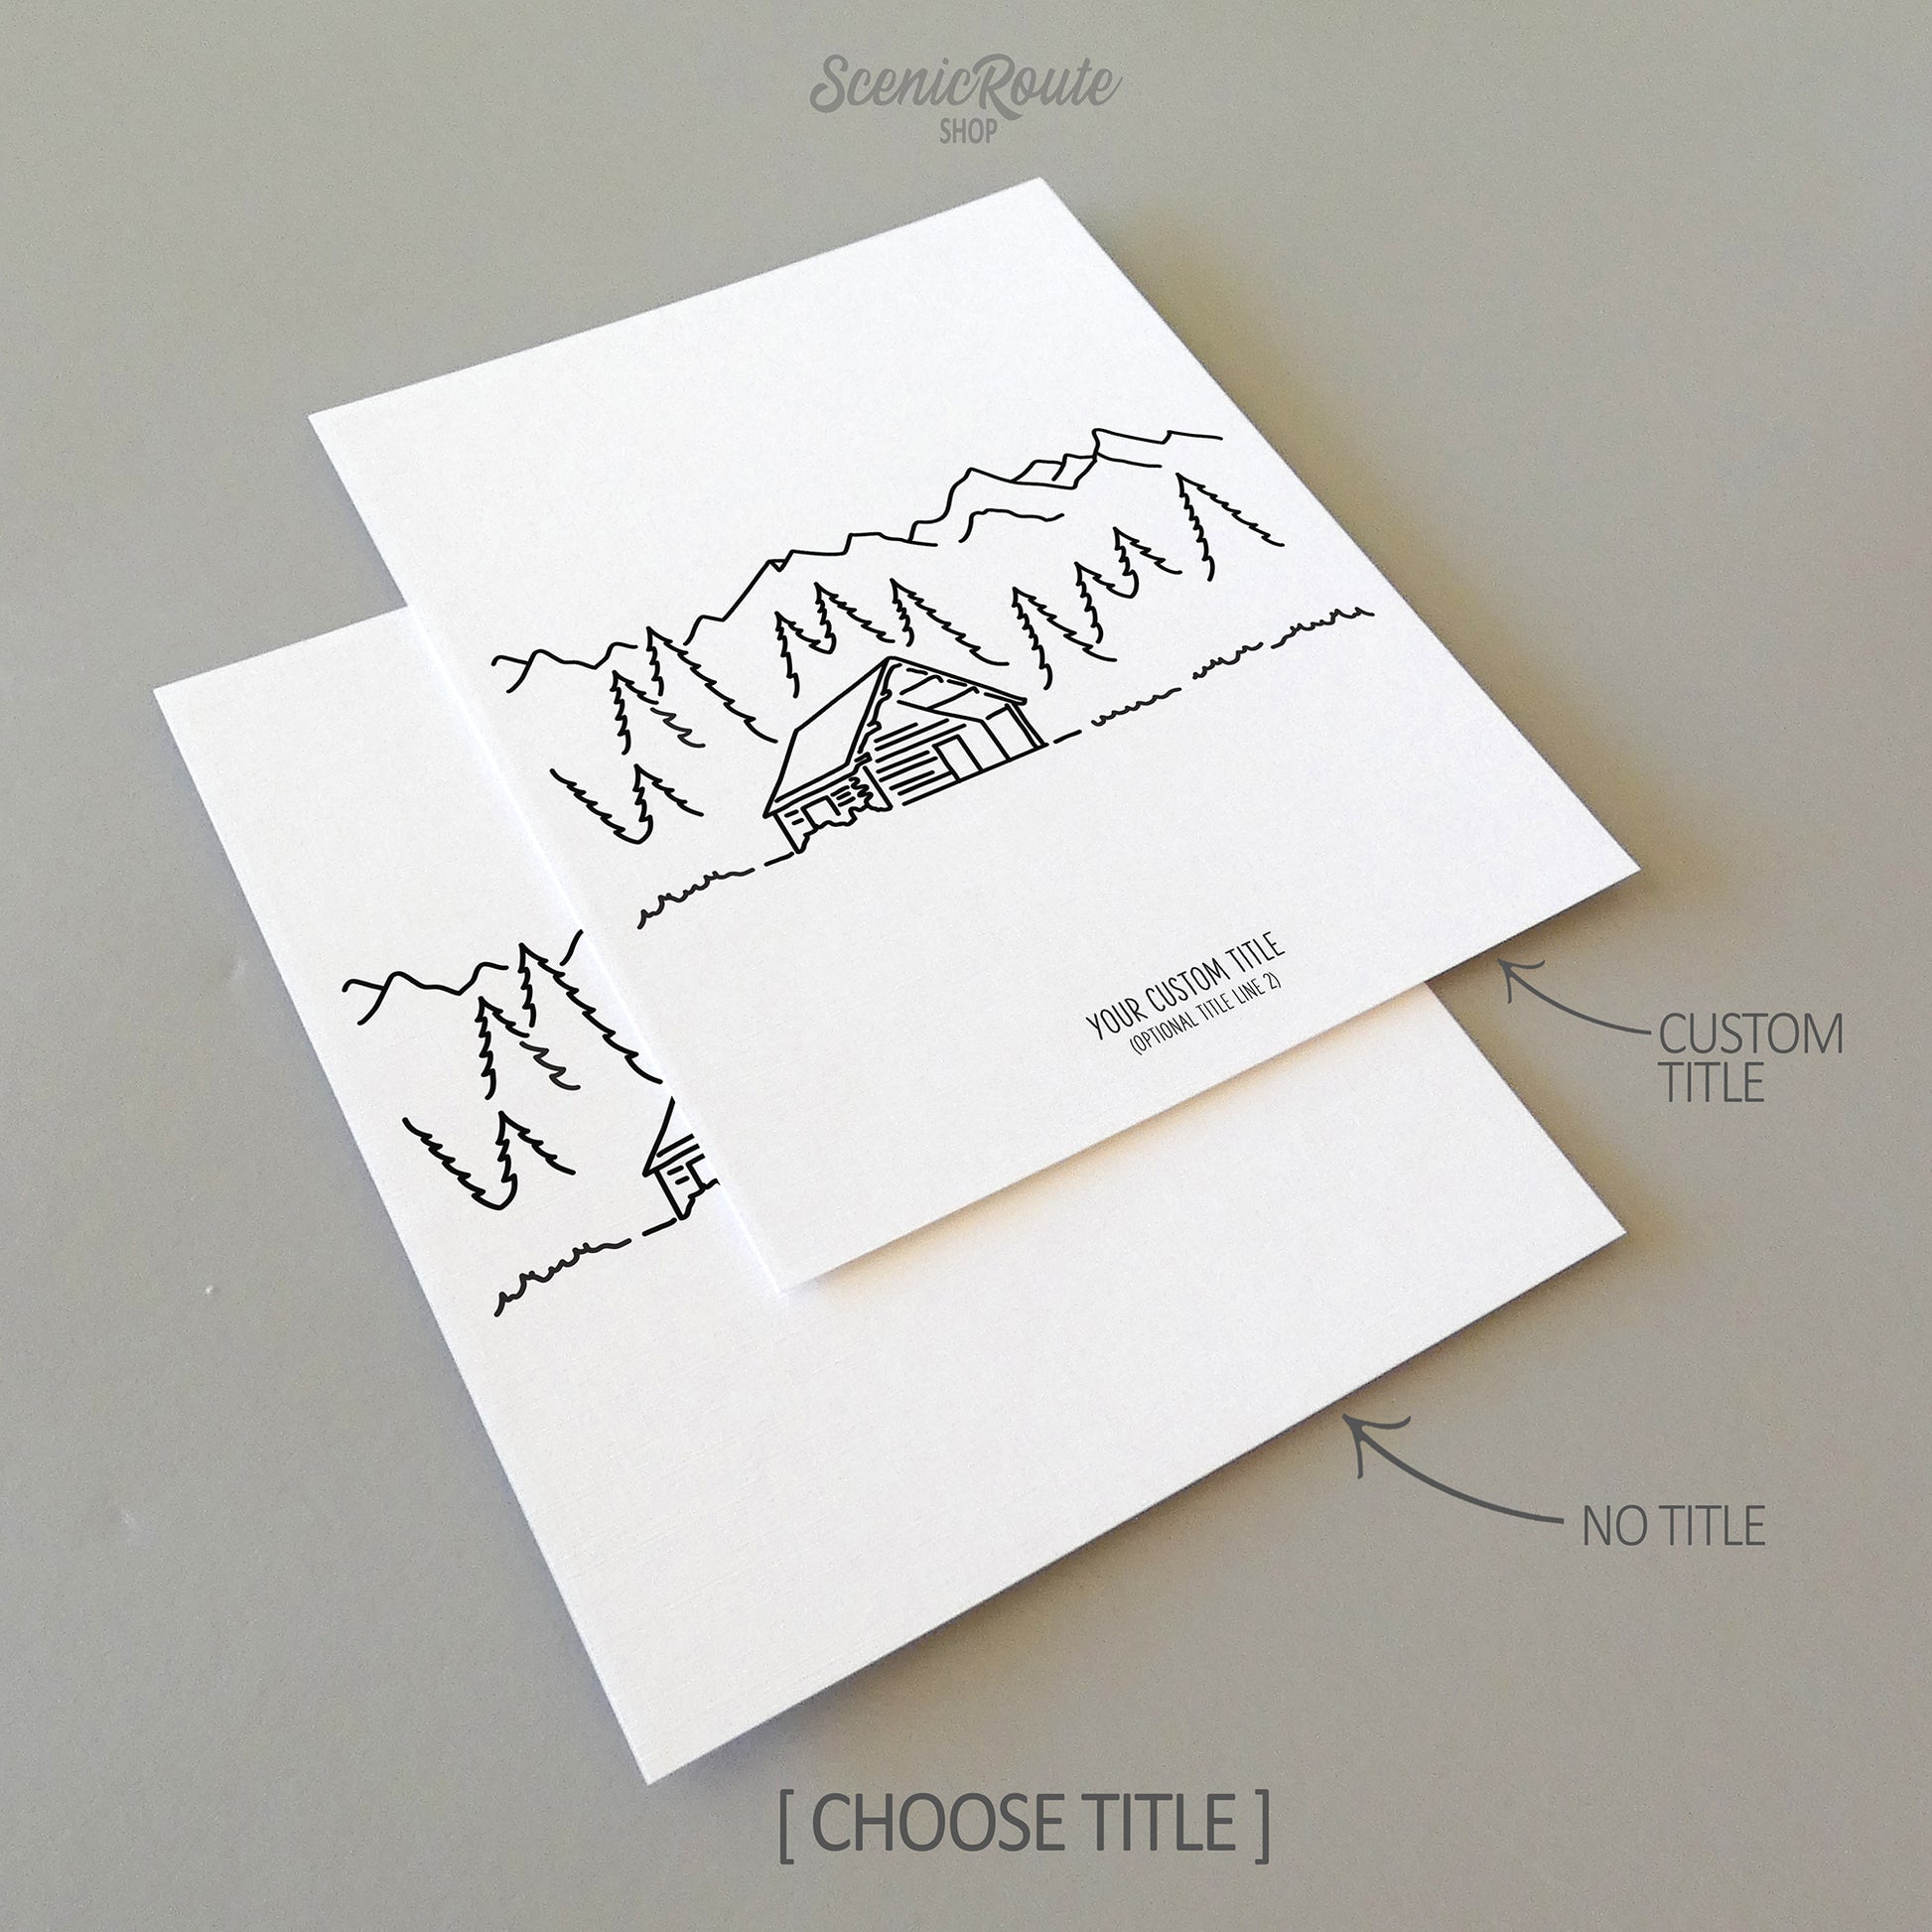 Two line art drawings of a cabin in the pine forest with mountains in the background on white linen paper with a gray background.  The pieces are shown with “No Title” and “Custom Title” options for the available art print options.